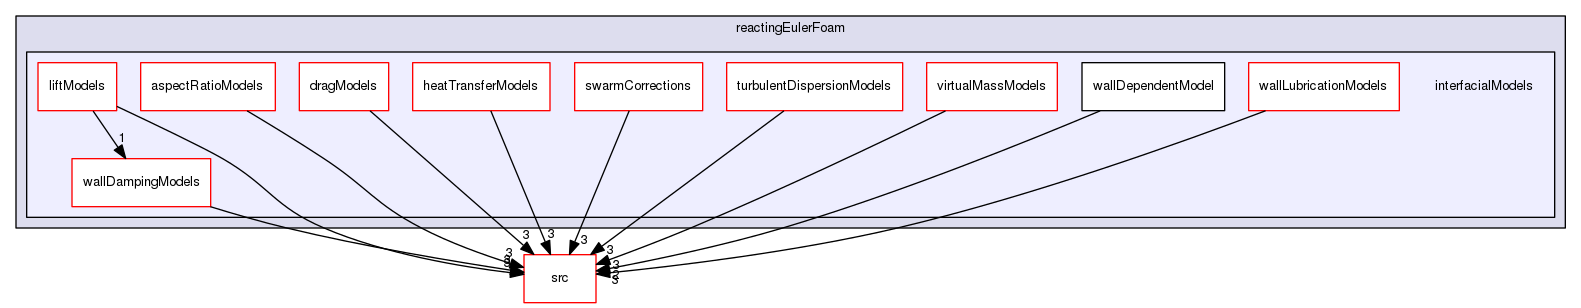 applications/solvers/multiphase/reactingEulerFoam/interfacialModels